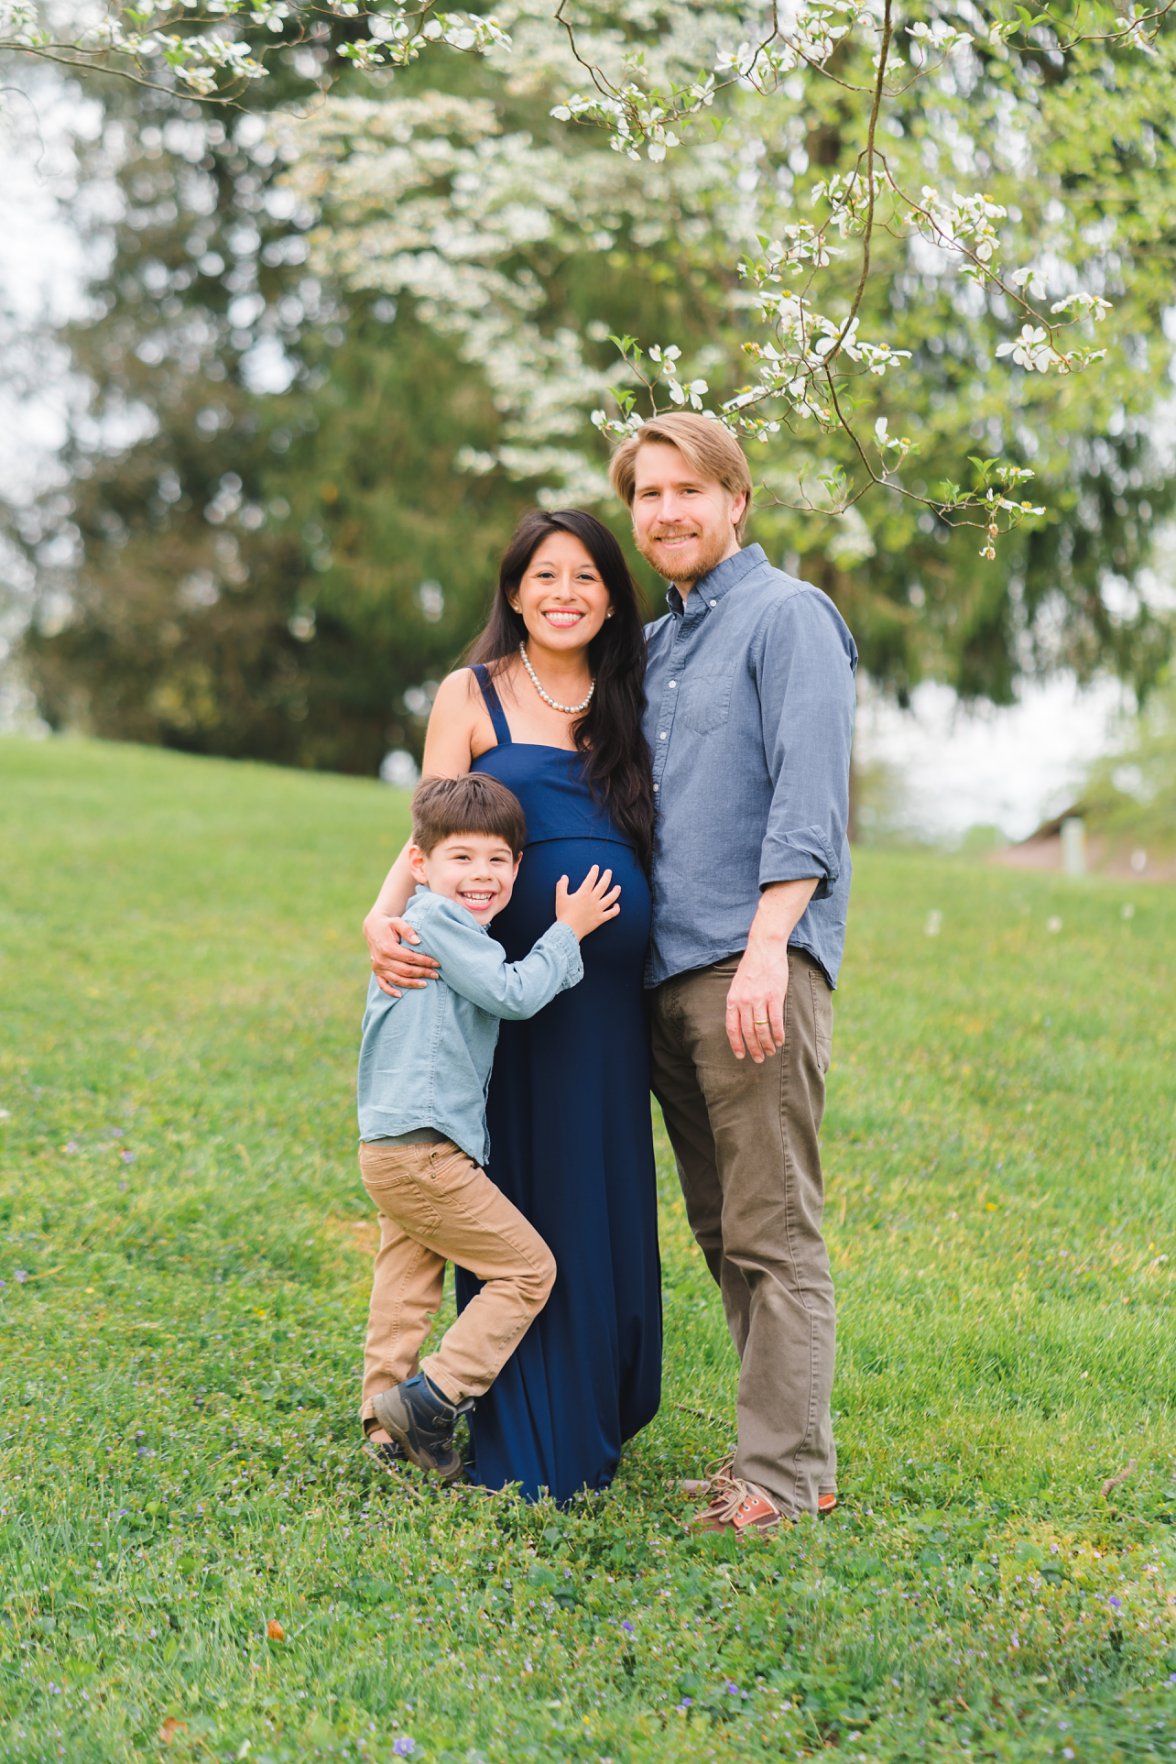 family of three standing in grass with tree blooms | Montgomery, Alabama Maternity Photographer